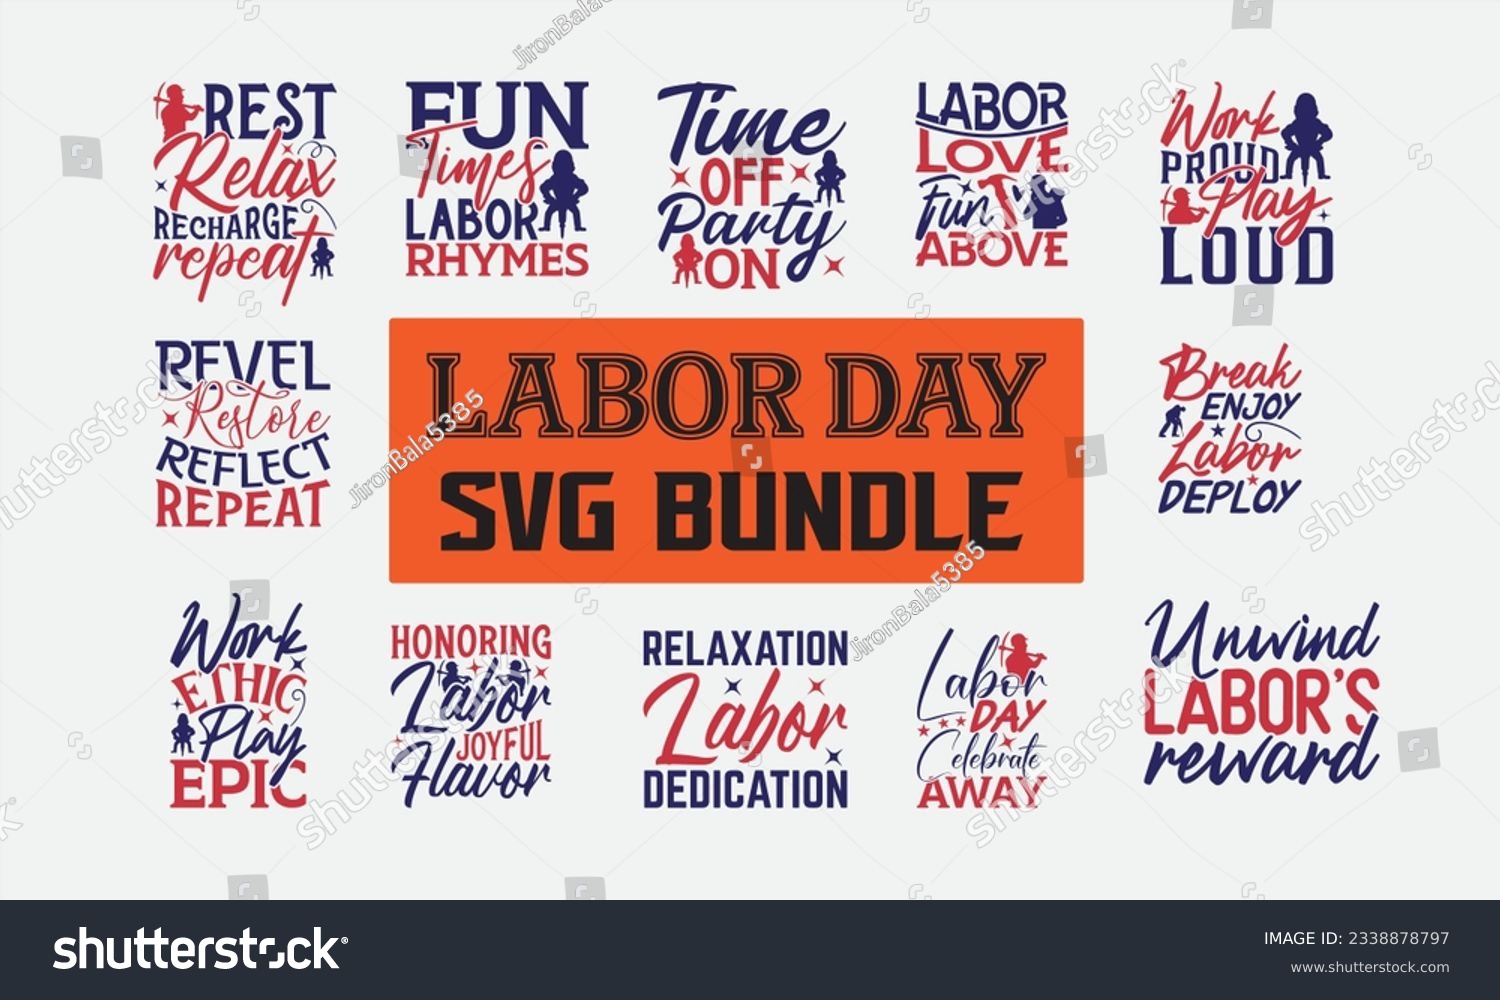 SVG of Labor Day SVG Bundle - labor day svg bundle, typography t shirt design, Illustration for prints on t-shirts, bags, posters, cards and Mug.
 svg